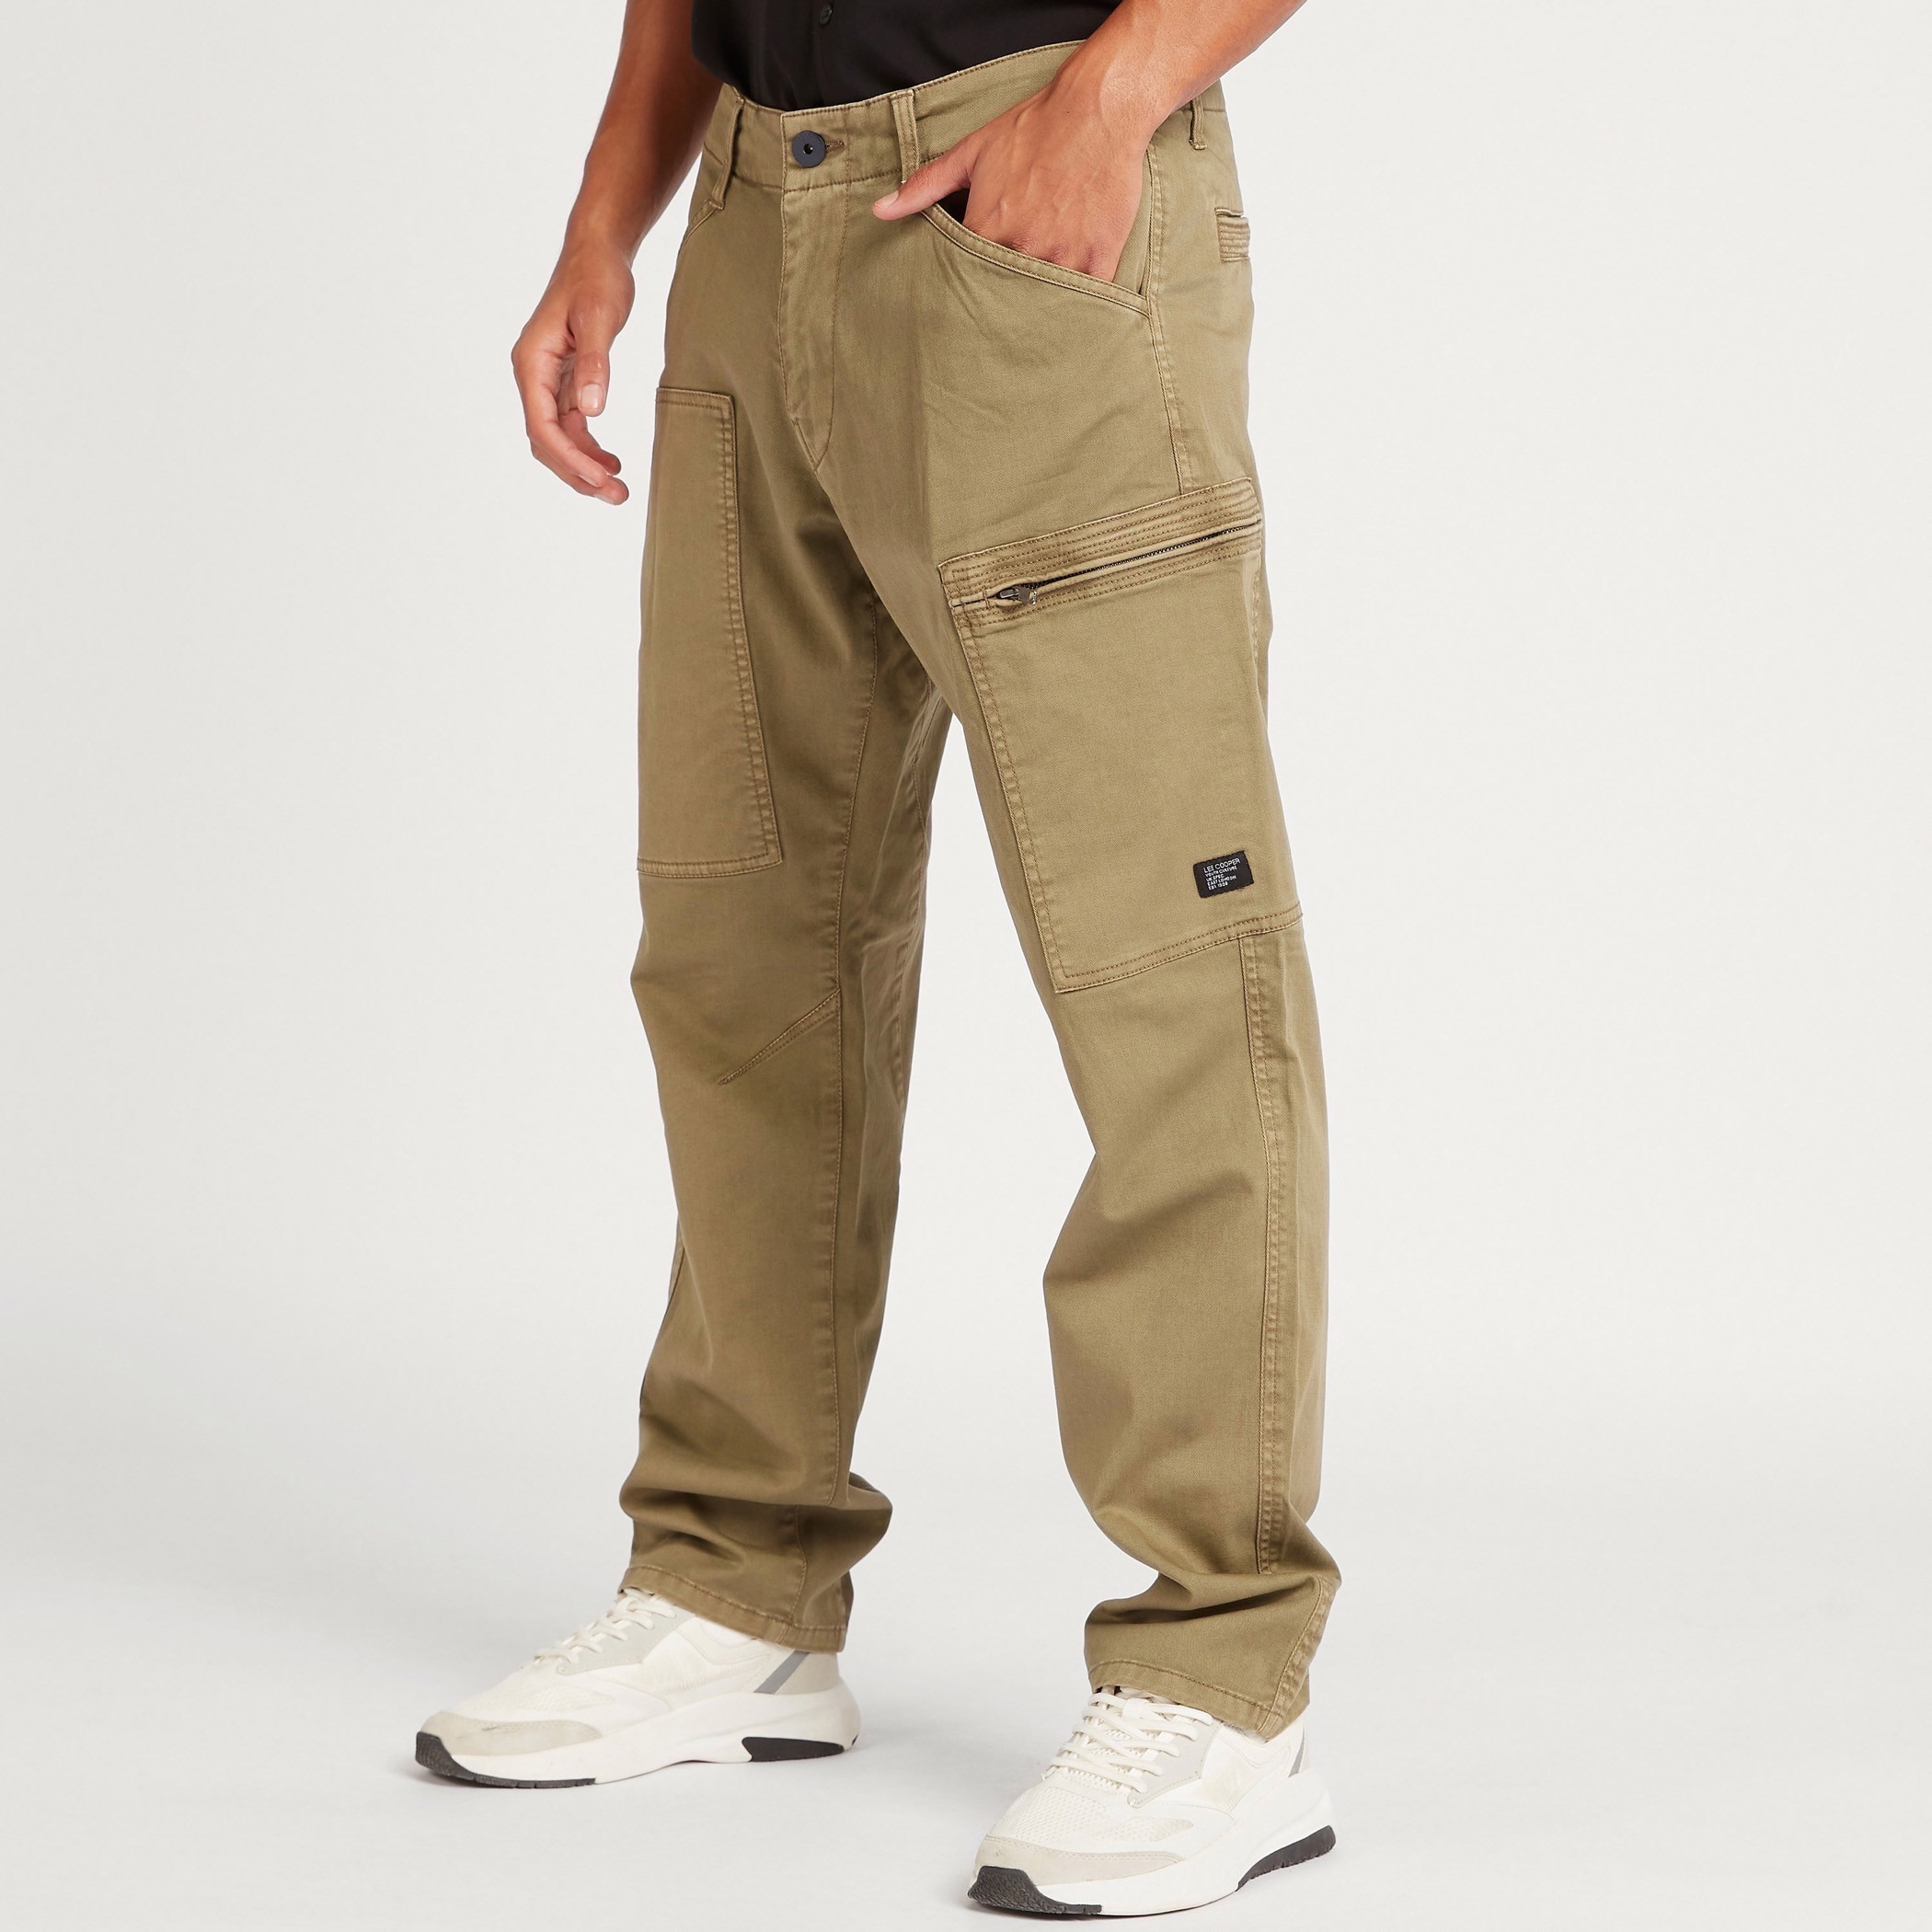 Lee Cooper Sage Green Baggy Tactical Cargo Pants, Men's Fashion, Bottoms,  Jeans on Carousell